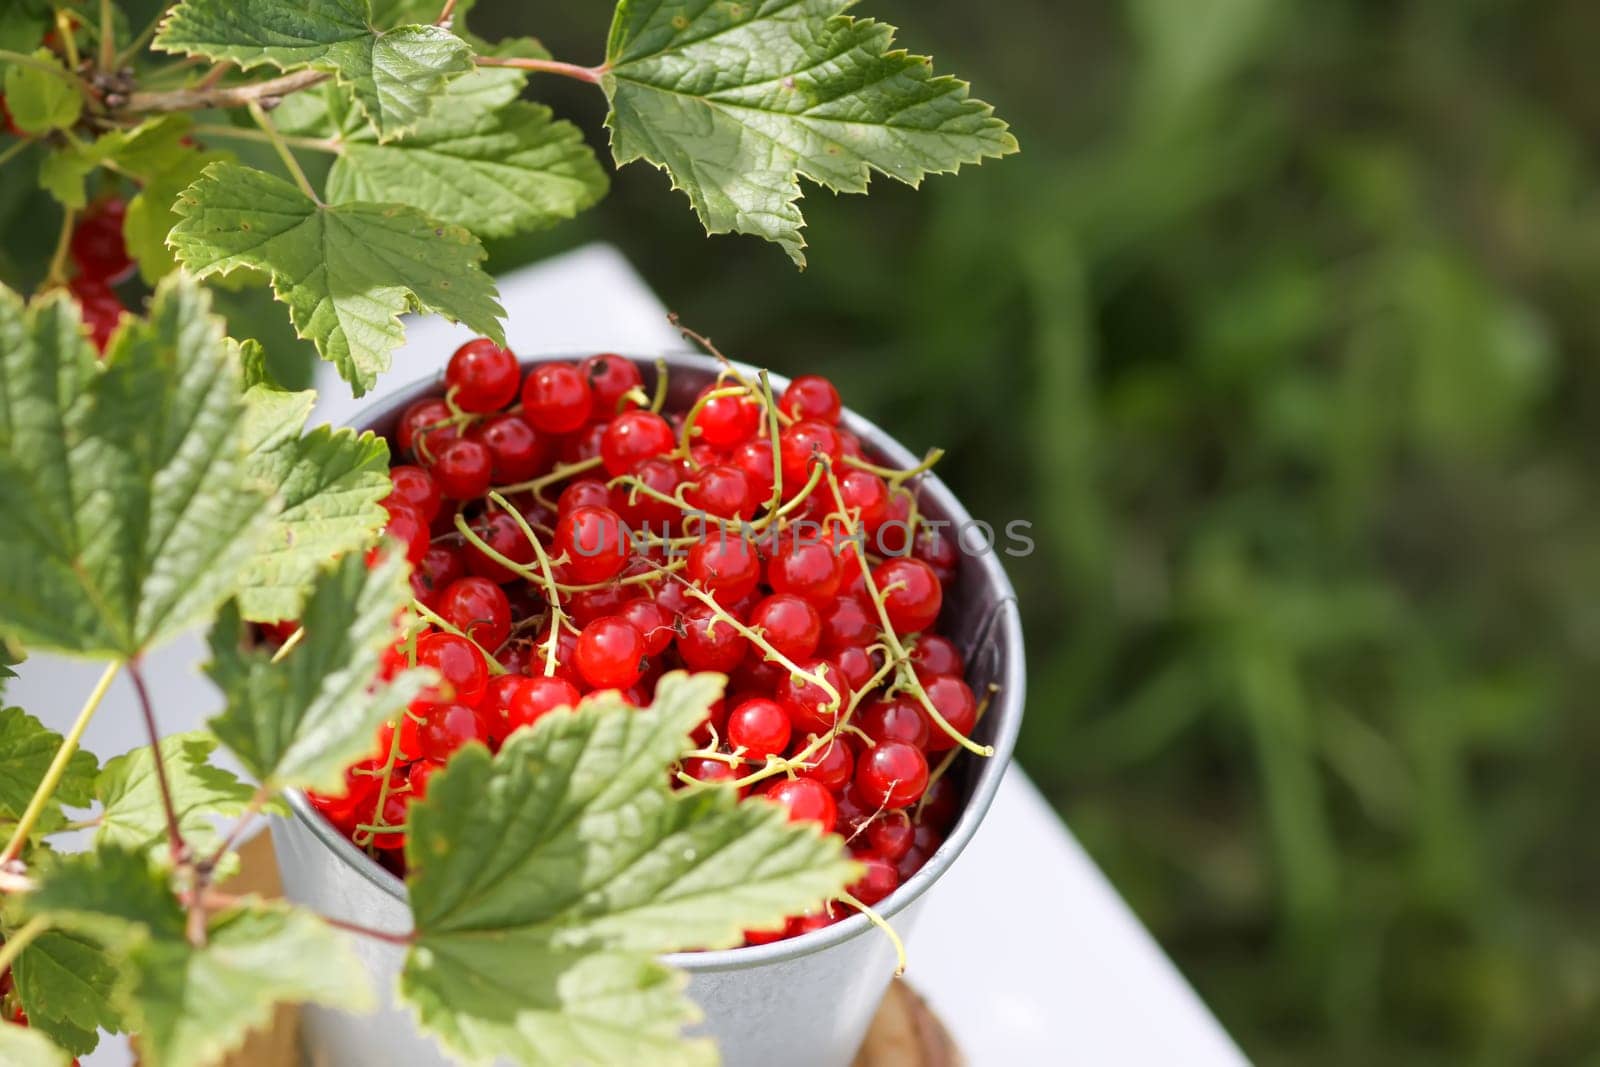 Red currant berries in the berry picking season in the countryside.